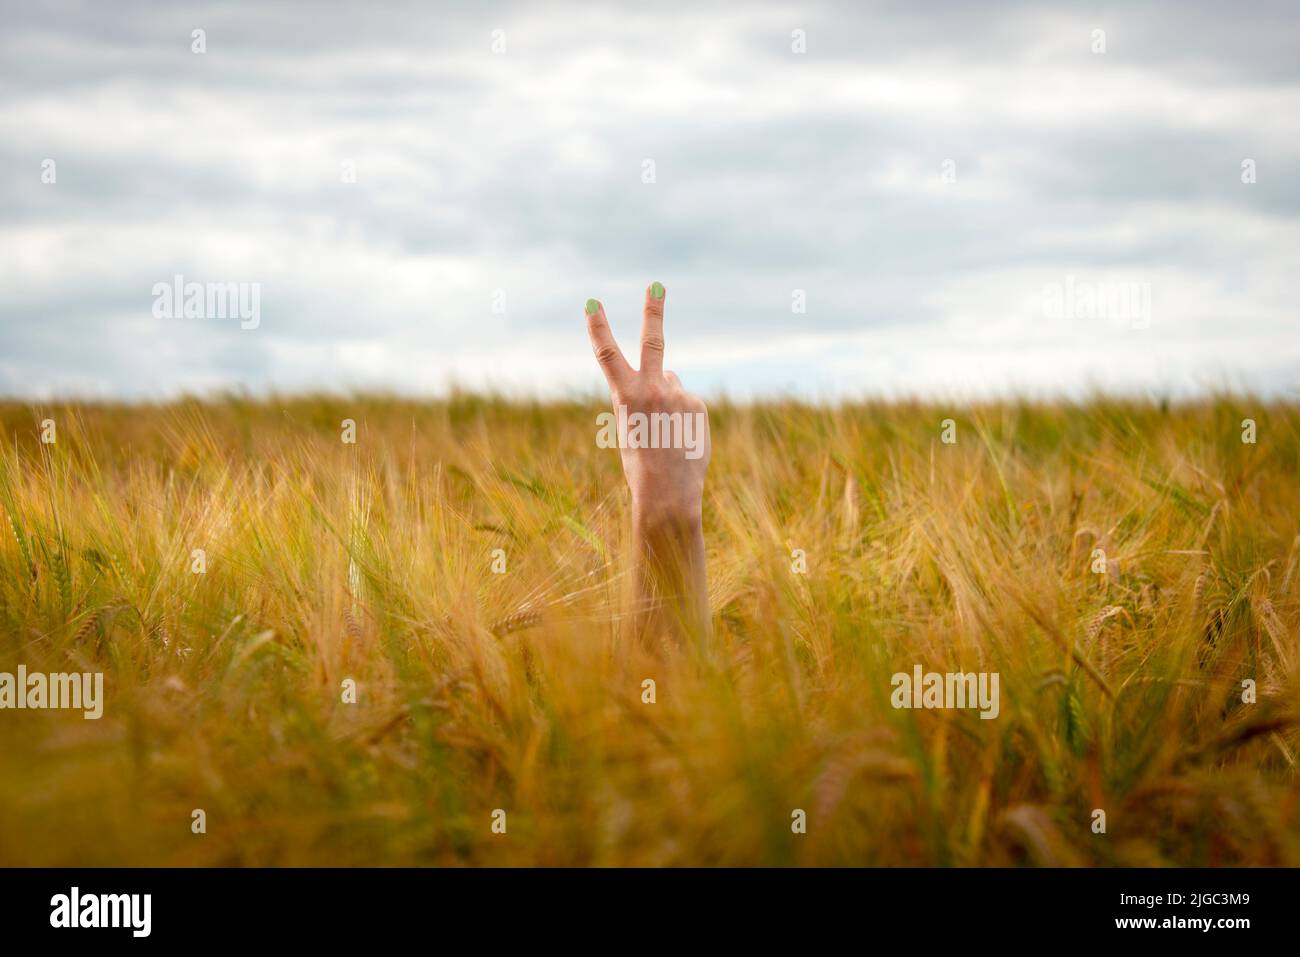 Hand with two fingers up in the air or sign, symbol of peace or victory on field background. Stock Photo